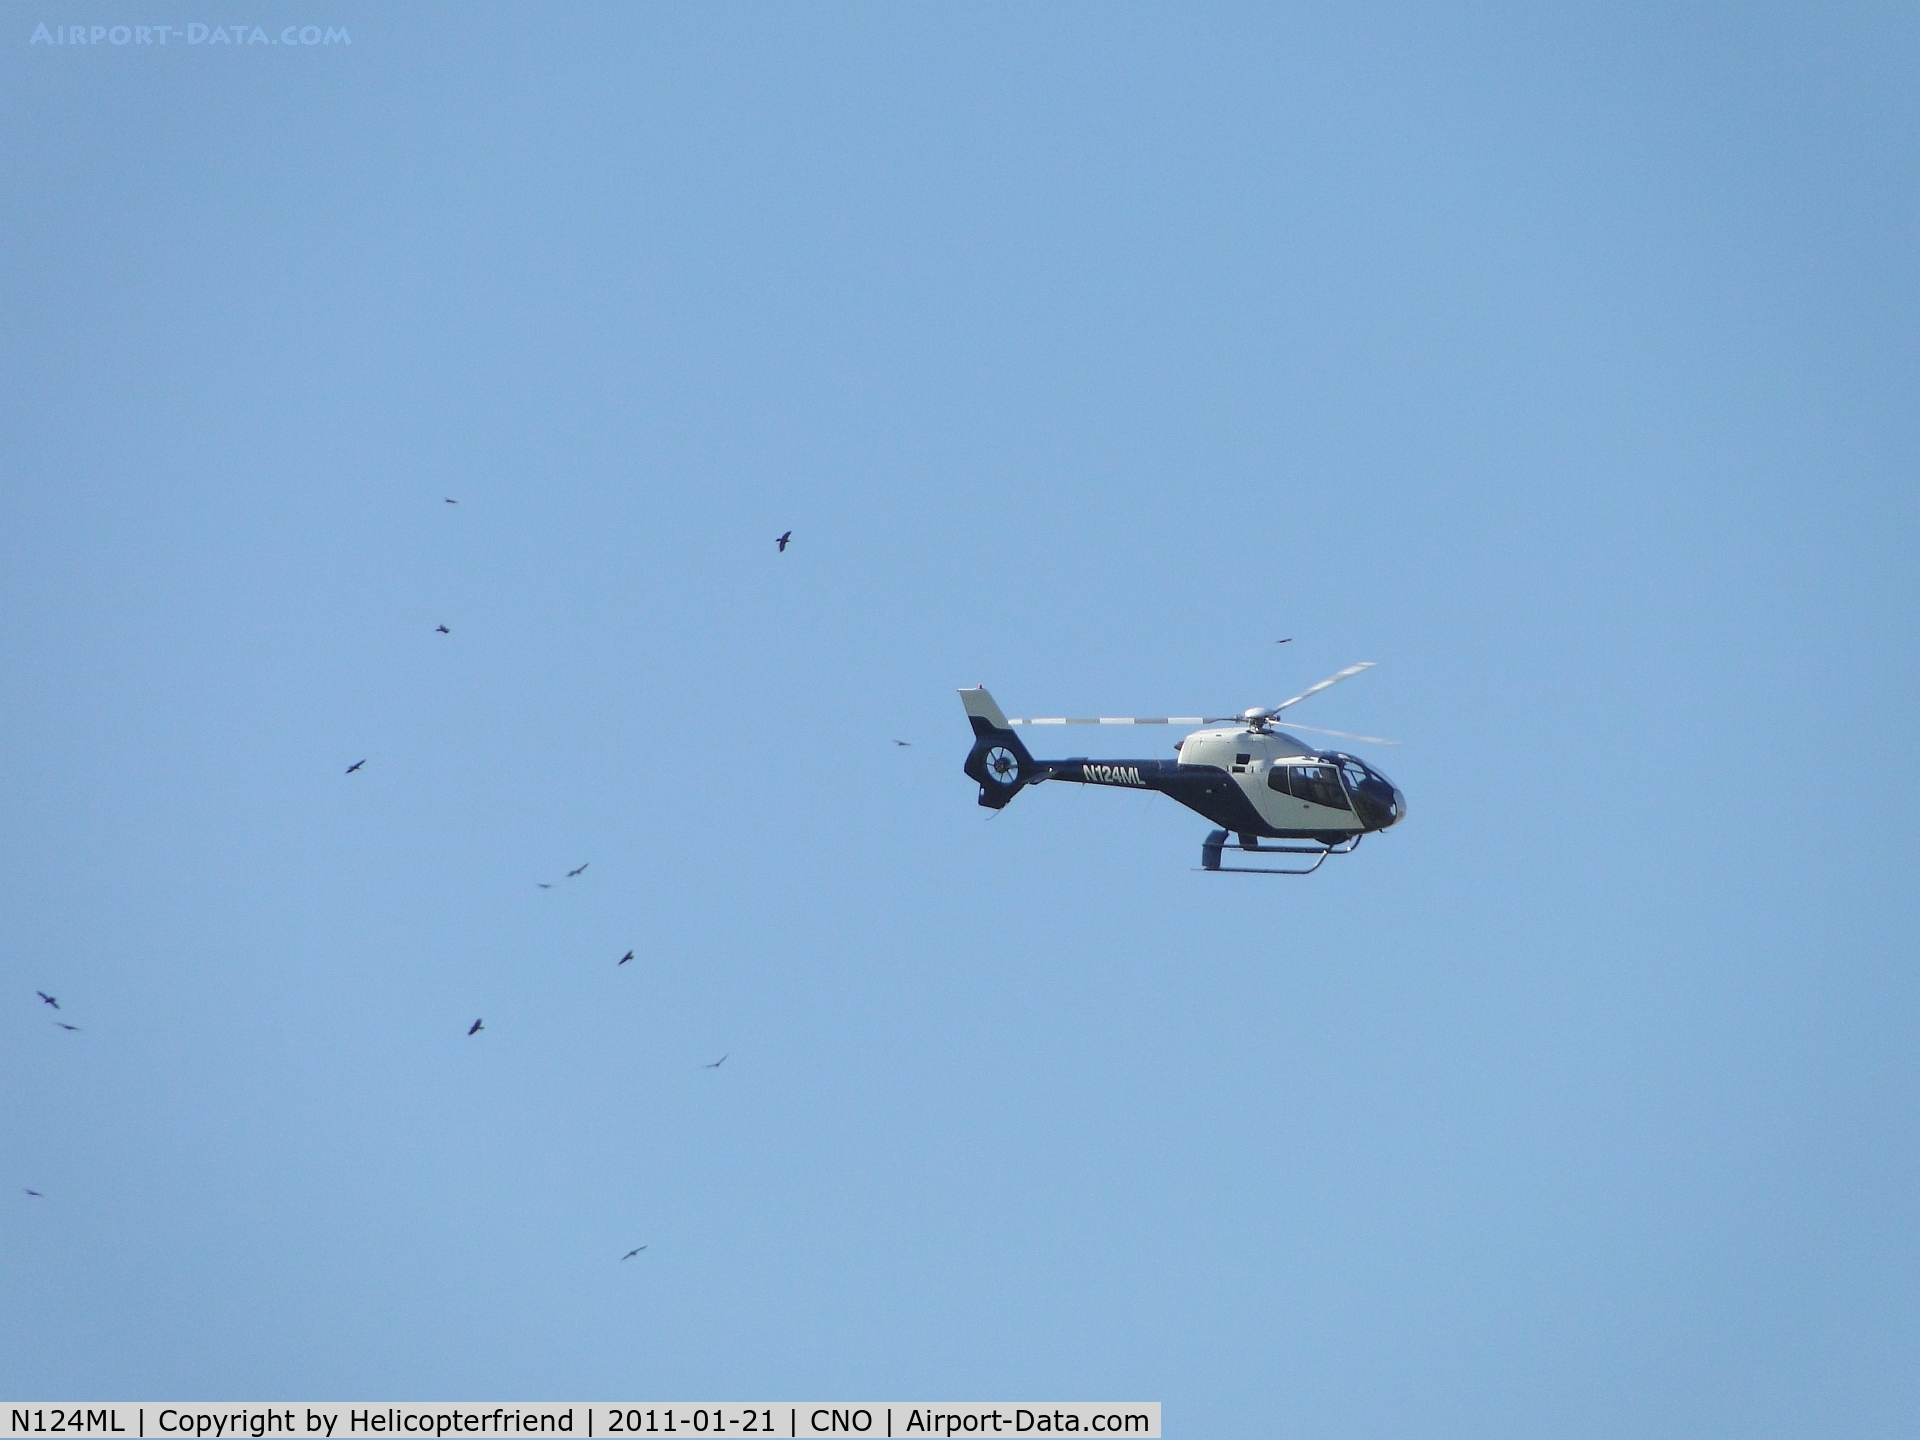 N124ML, 2001 Eurocopter EC-120B Colibri C/N 1262, Appears to be flying with a group of birds